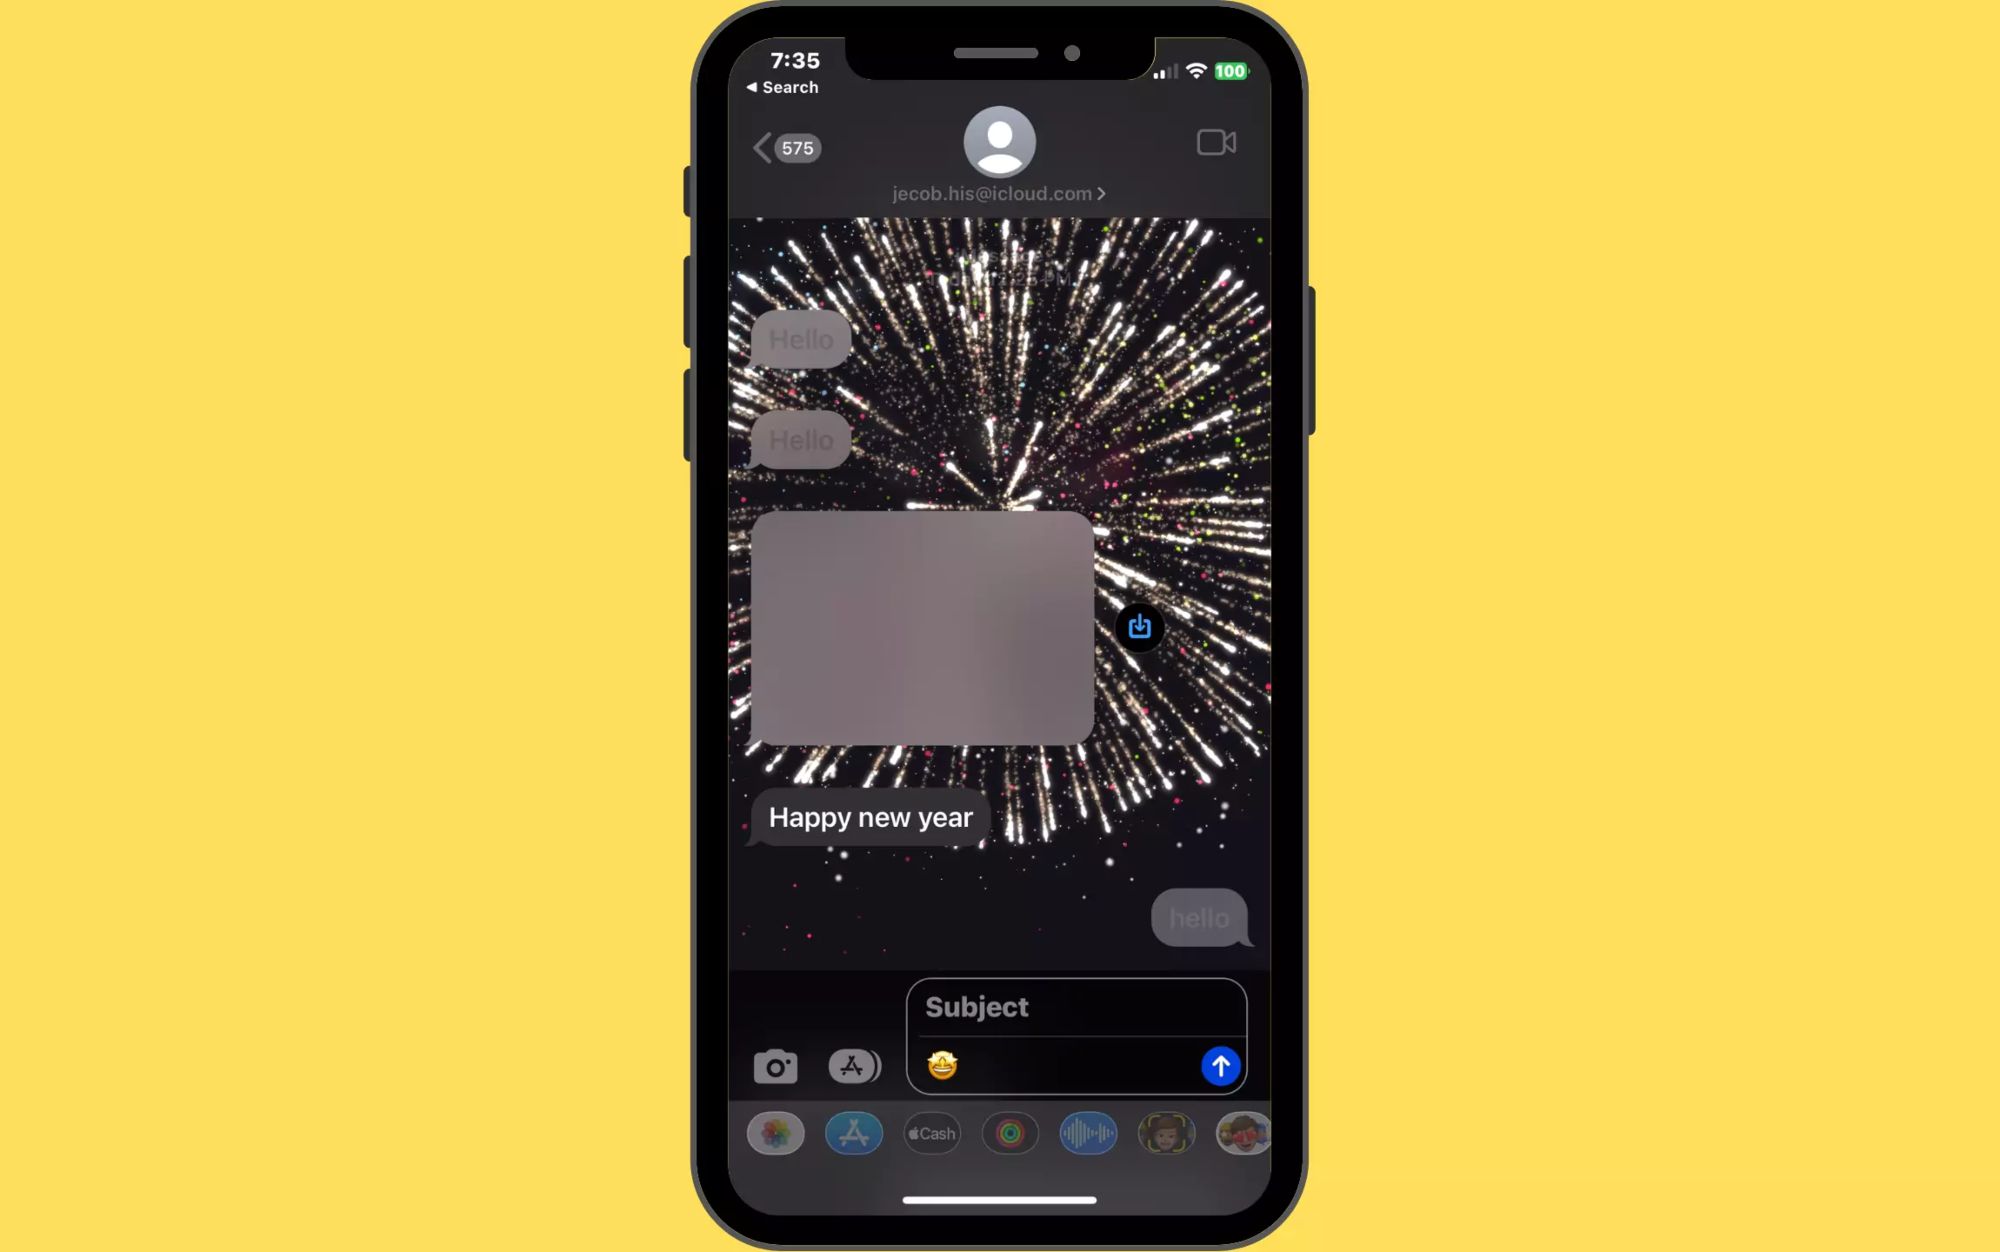 How To Send Effects (Fireworks & More) On IPhone